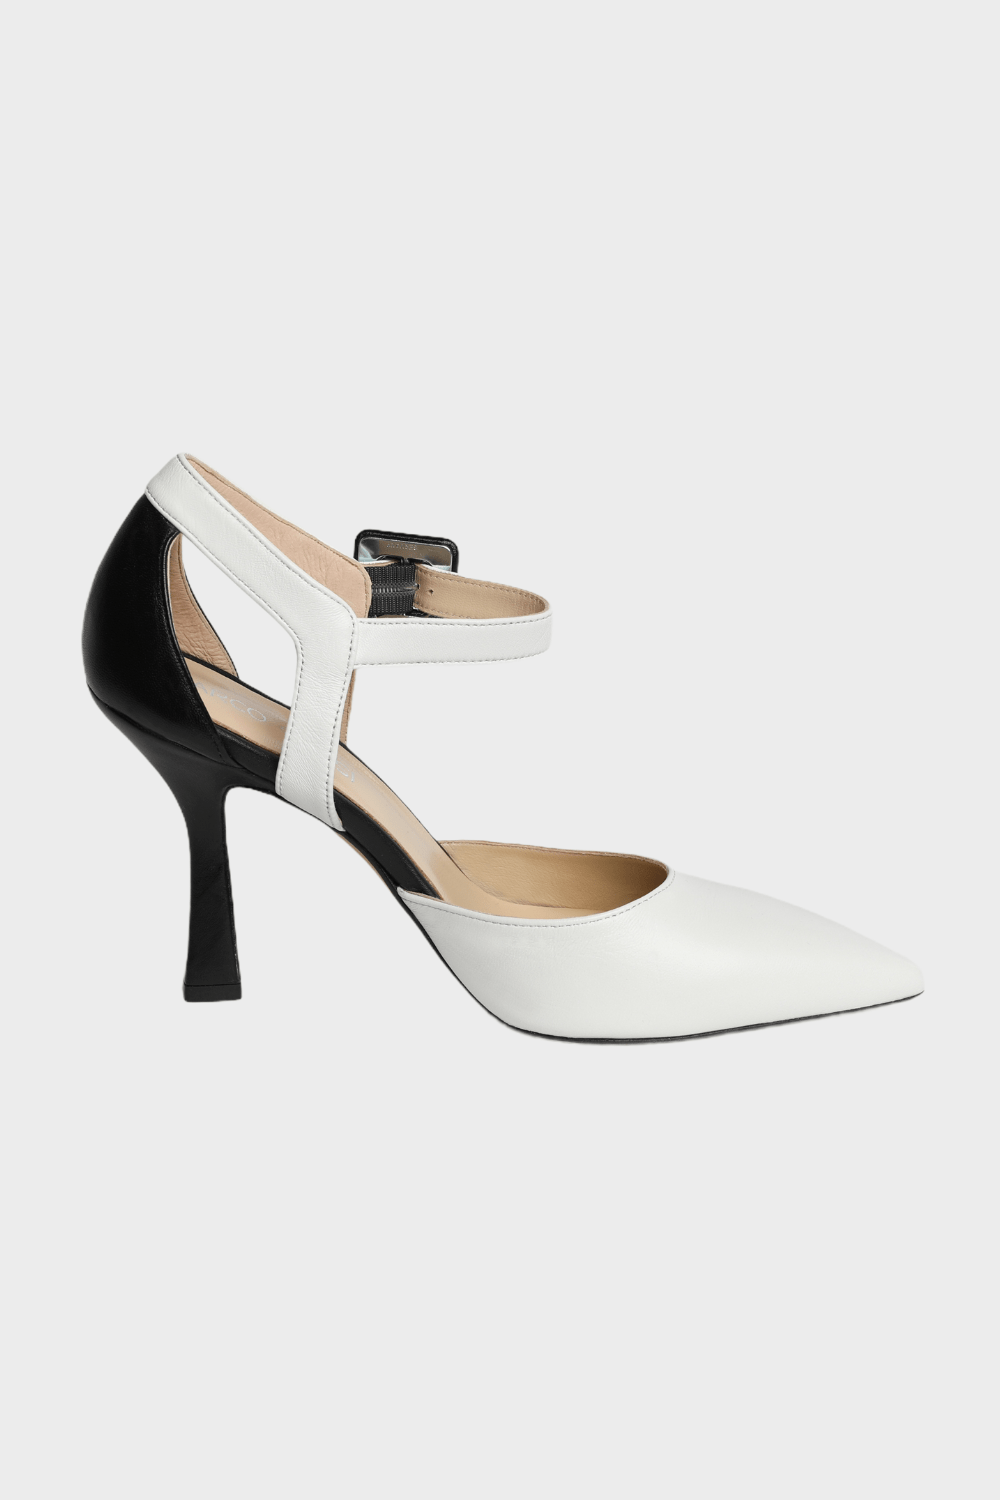 Marco Cinosi SHOES Gatsby Black & White Ankle Strap Pumps